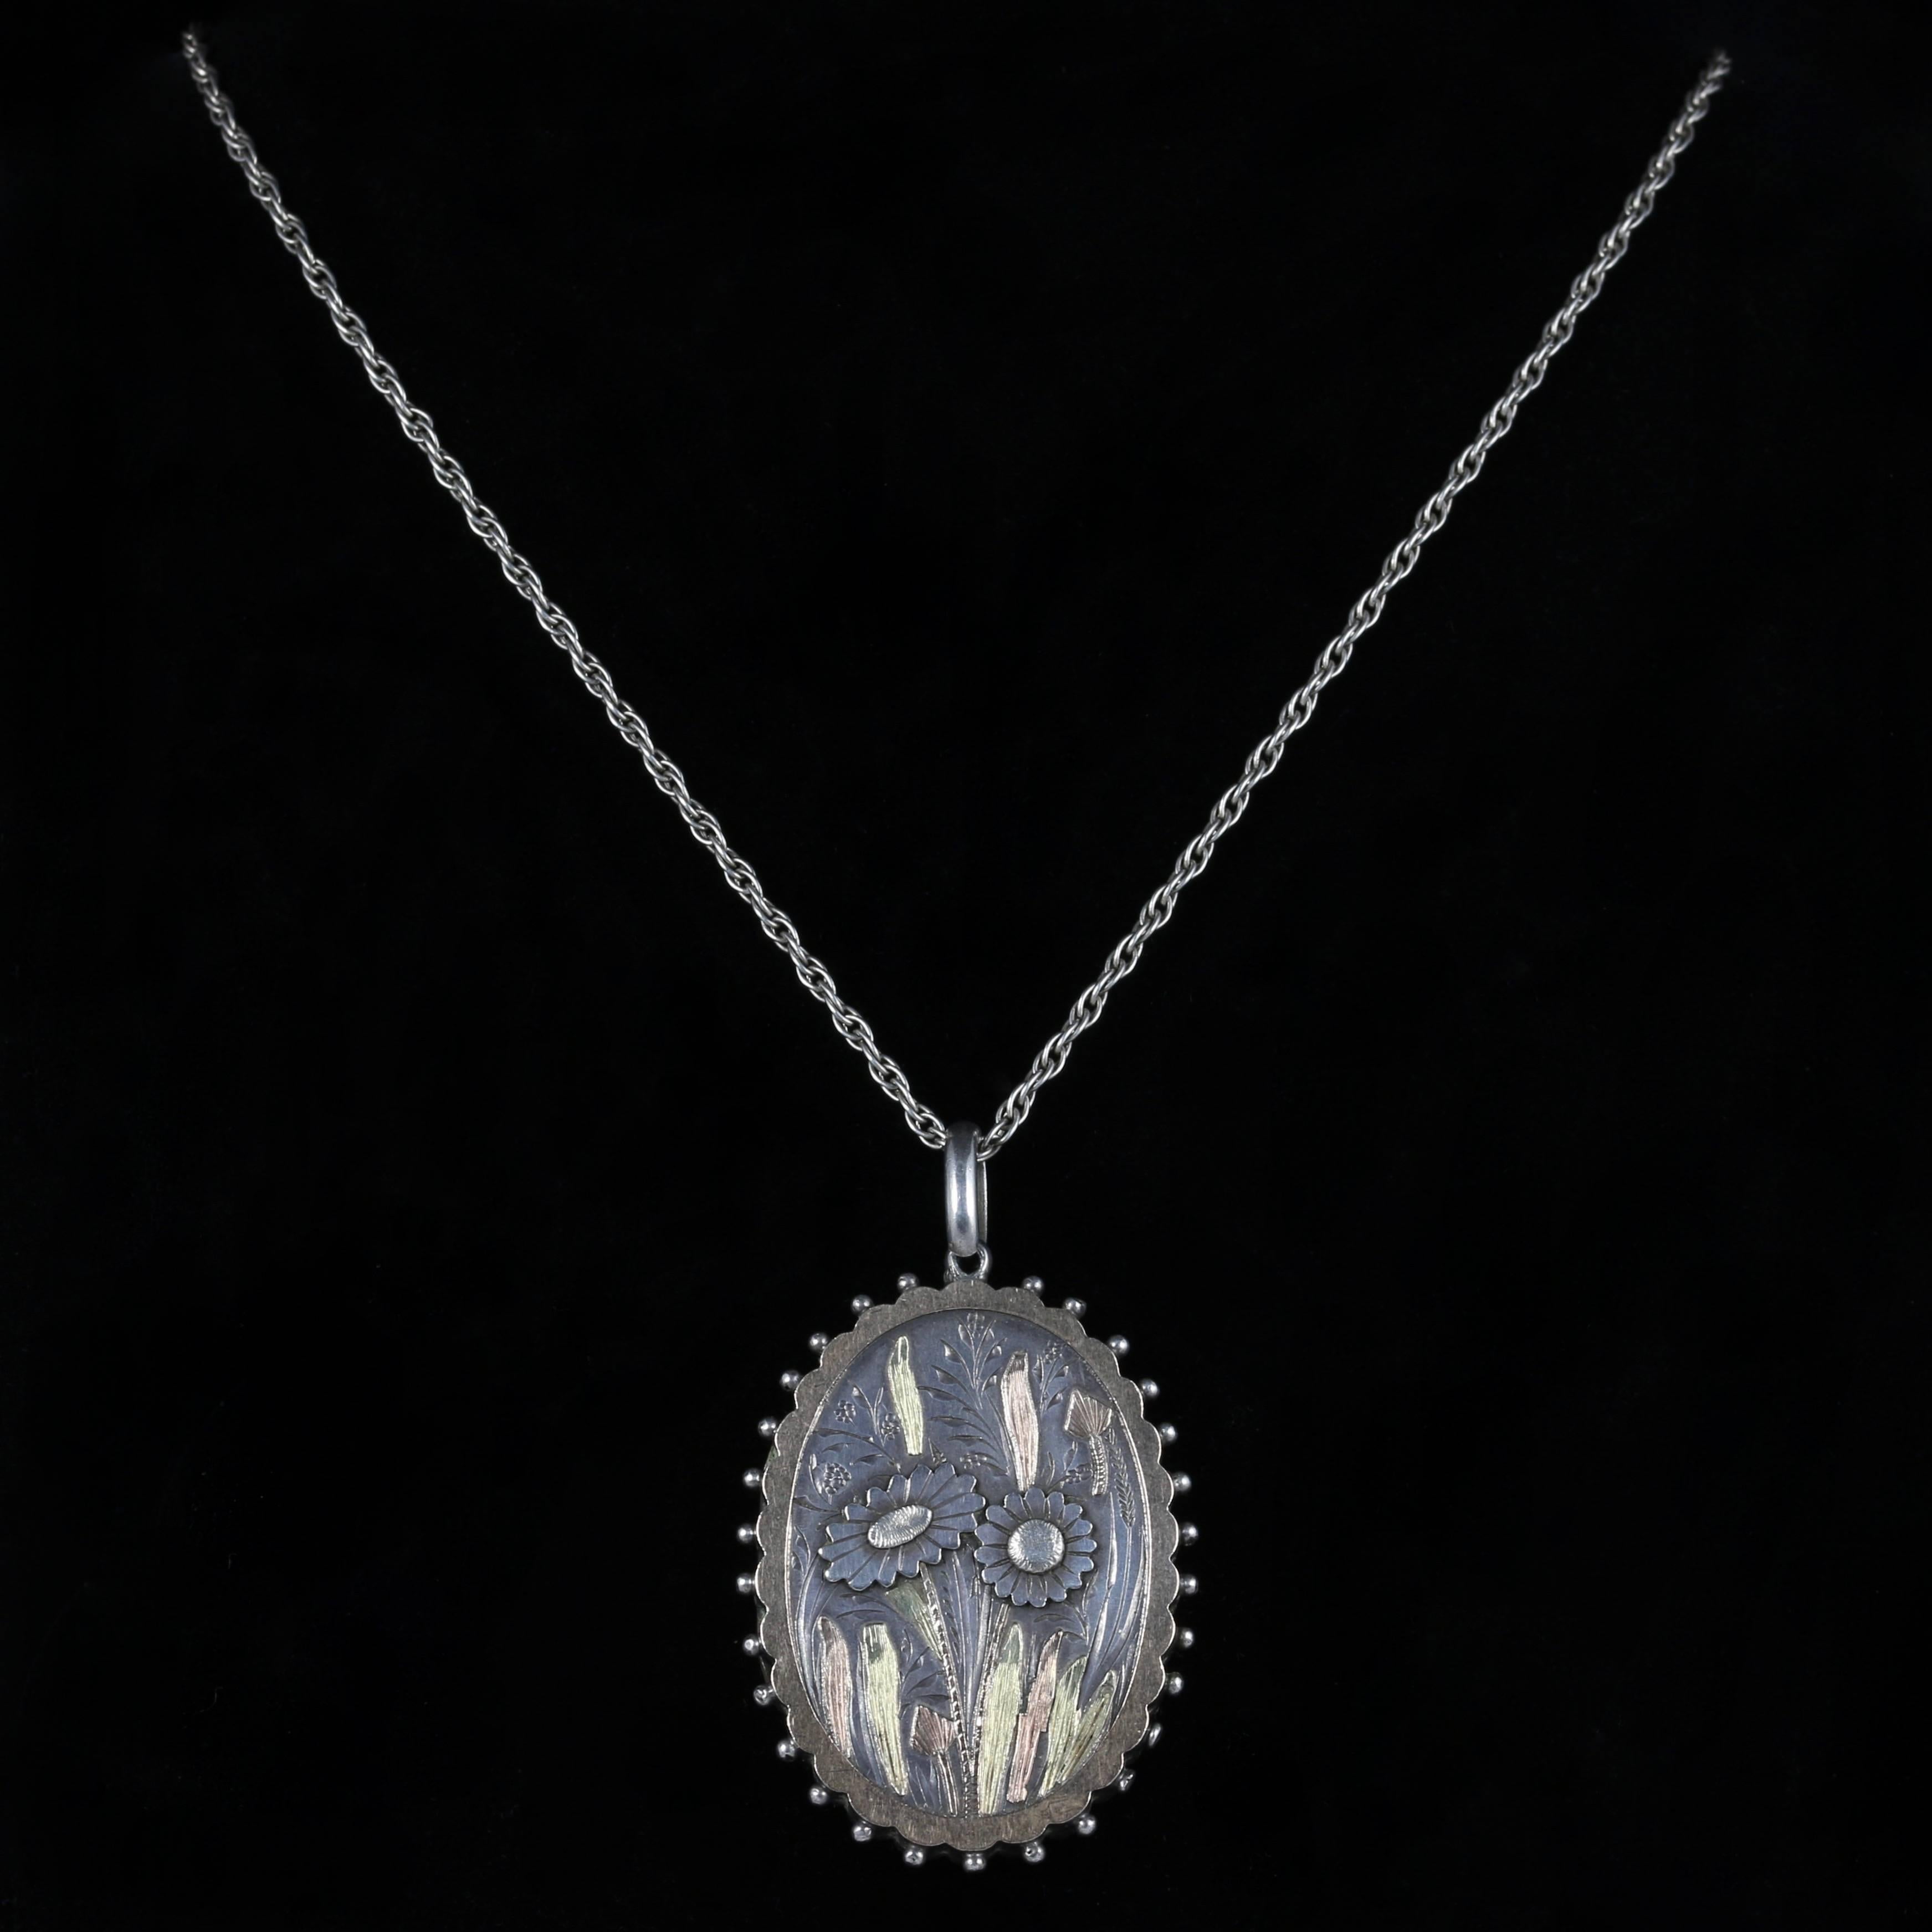 This beautiful Victorian Sterling Silver locket necklace is Circa 1900

The exquisite locket is set with two coloured Gold on the front, Rose Gold and 18ct Yellow Gold. 

A beautiful floral display sits on the front of the locket depicting two